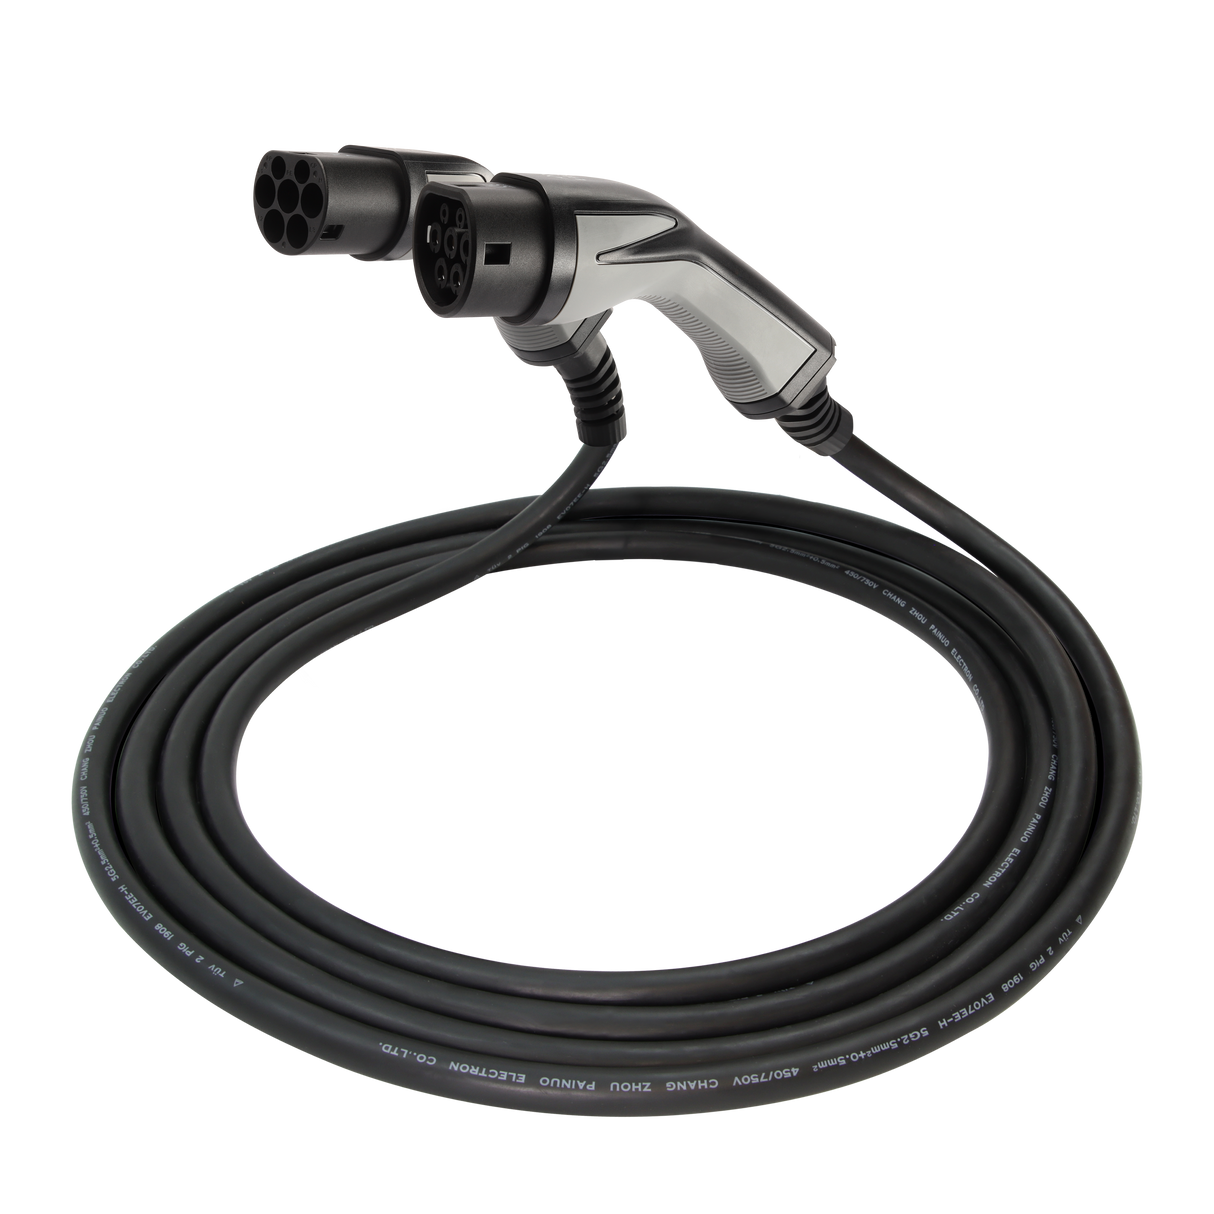 Charging cable Lucid Air - Erock Pro Type 2 - 32A 3 phase (22 kW)